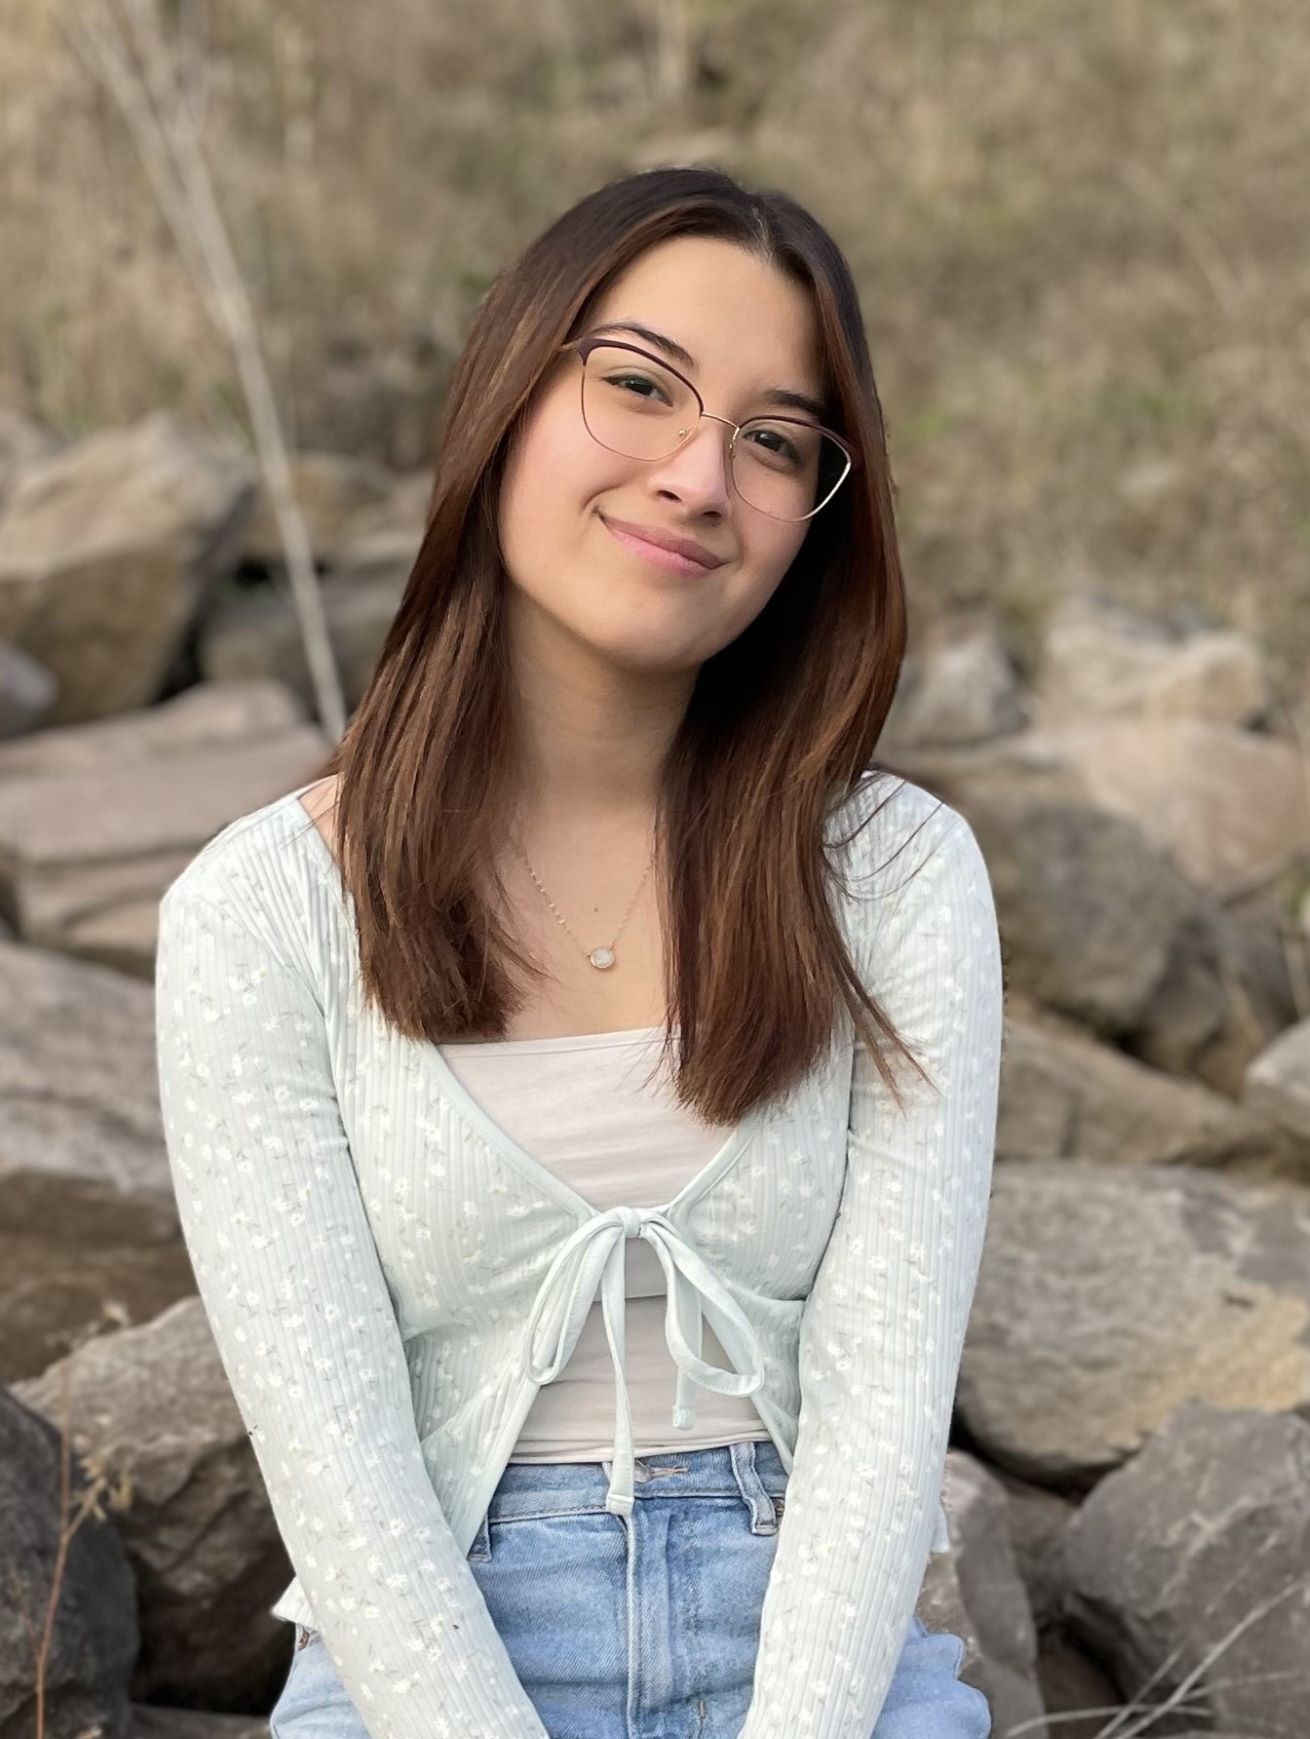 Lily smiling with glasses on, wearing a white sweater and light wash denim jeans, sitting ourside on rocks